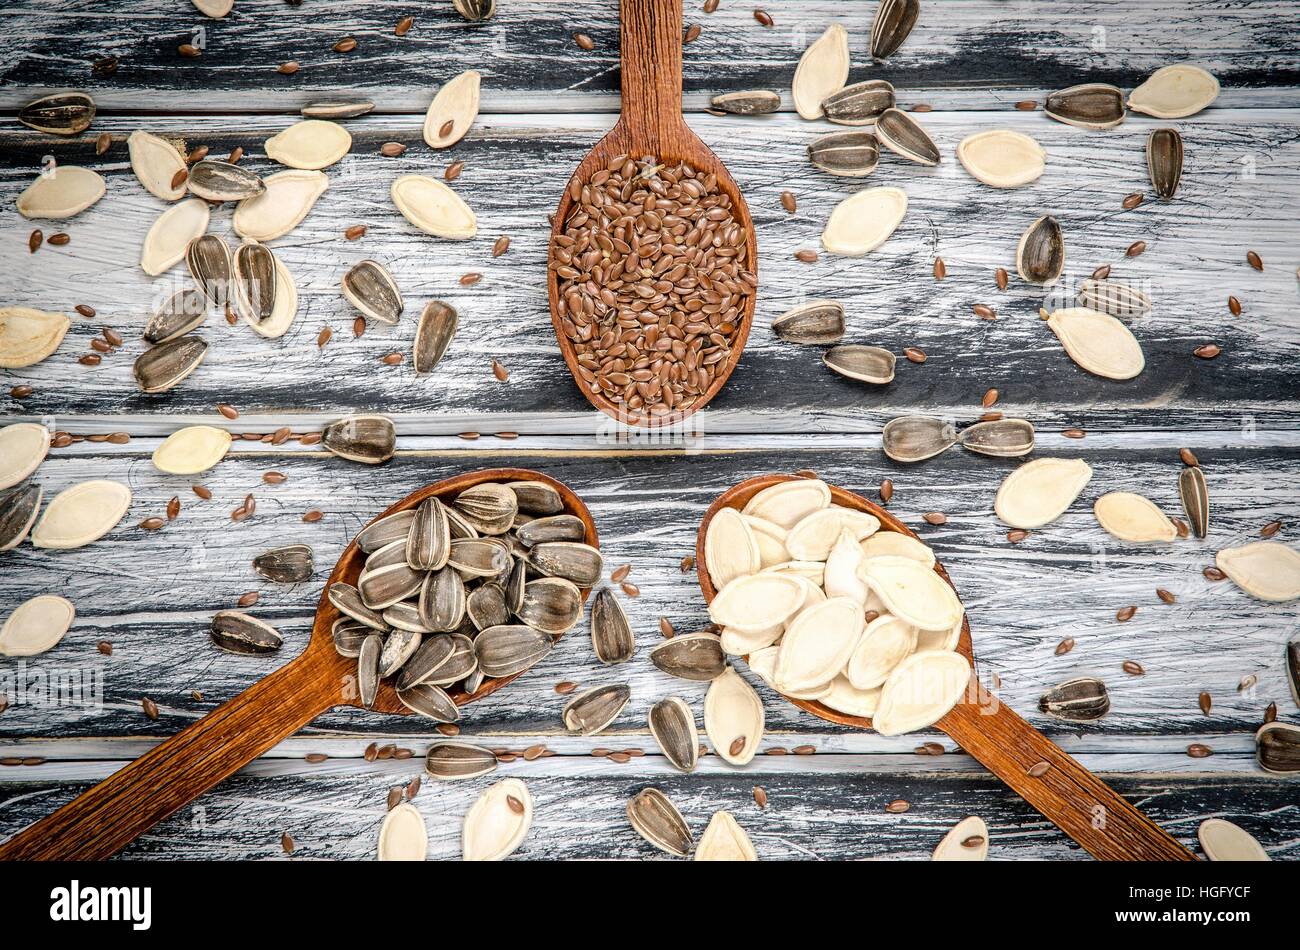 Sunflower, linseed and pumpkin seeds in wooden spoons. Stock Photo